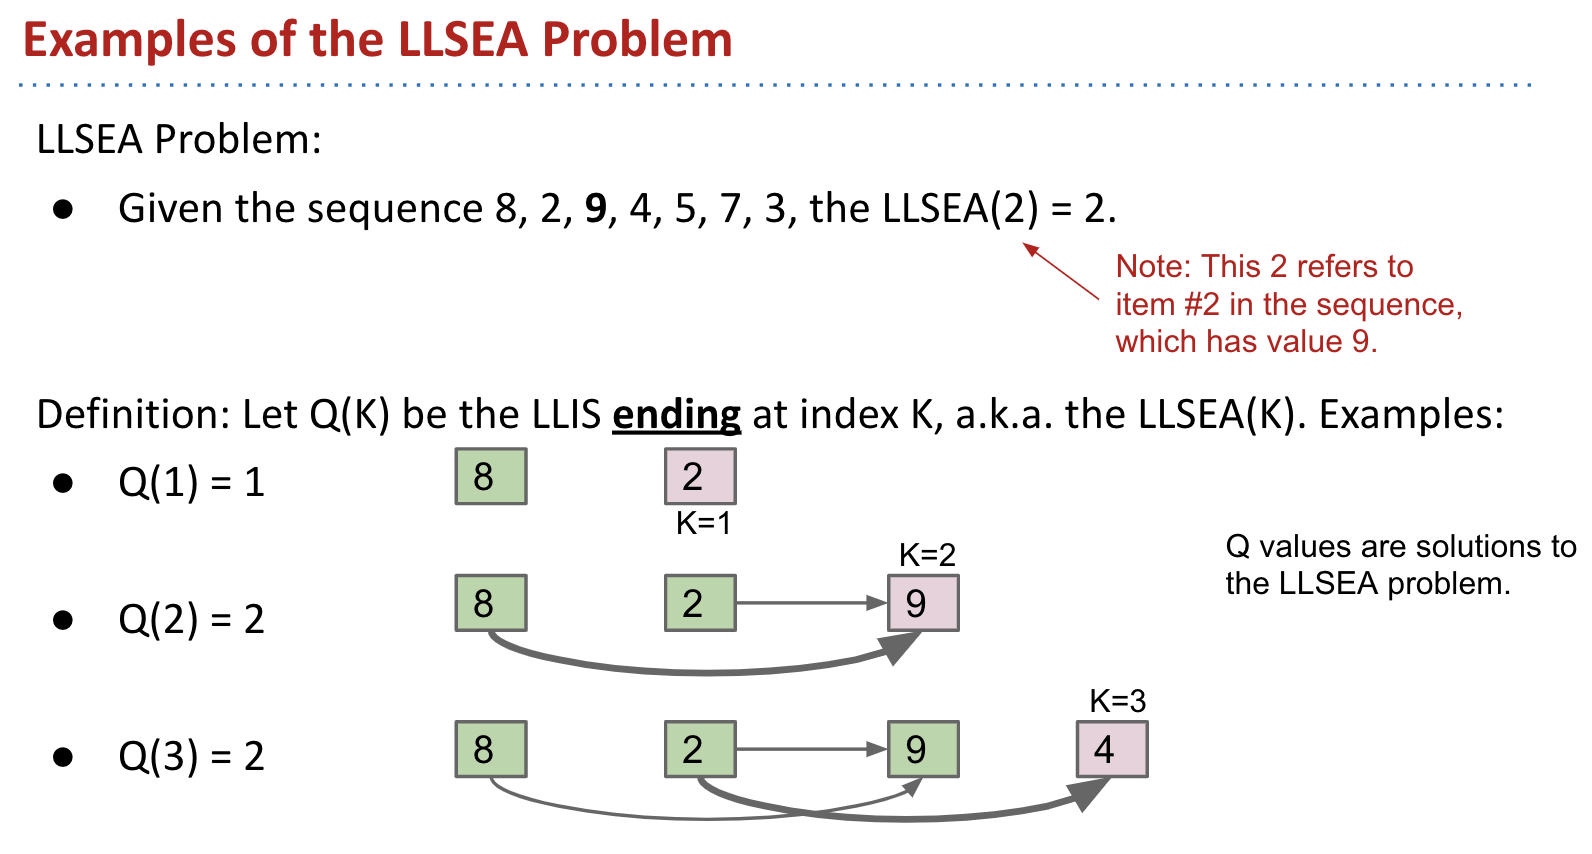 Examples of the LLSEA Problem